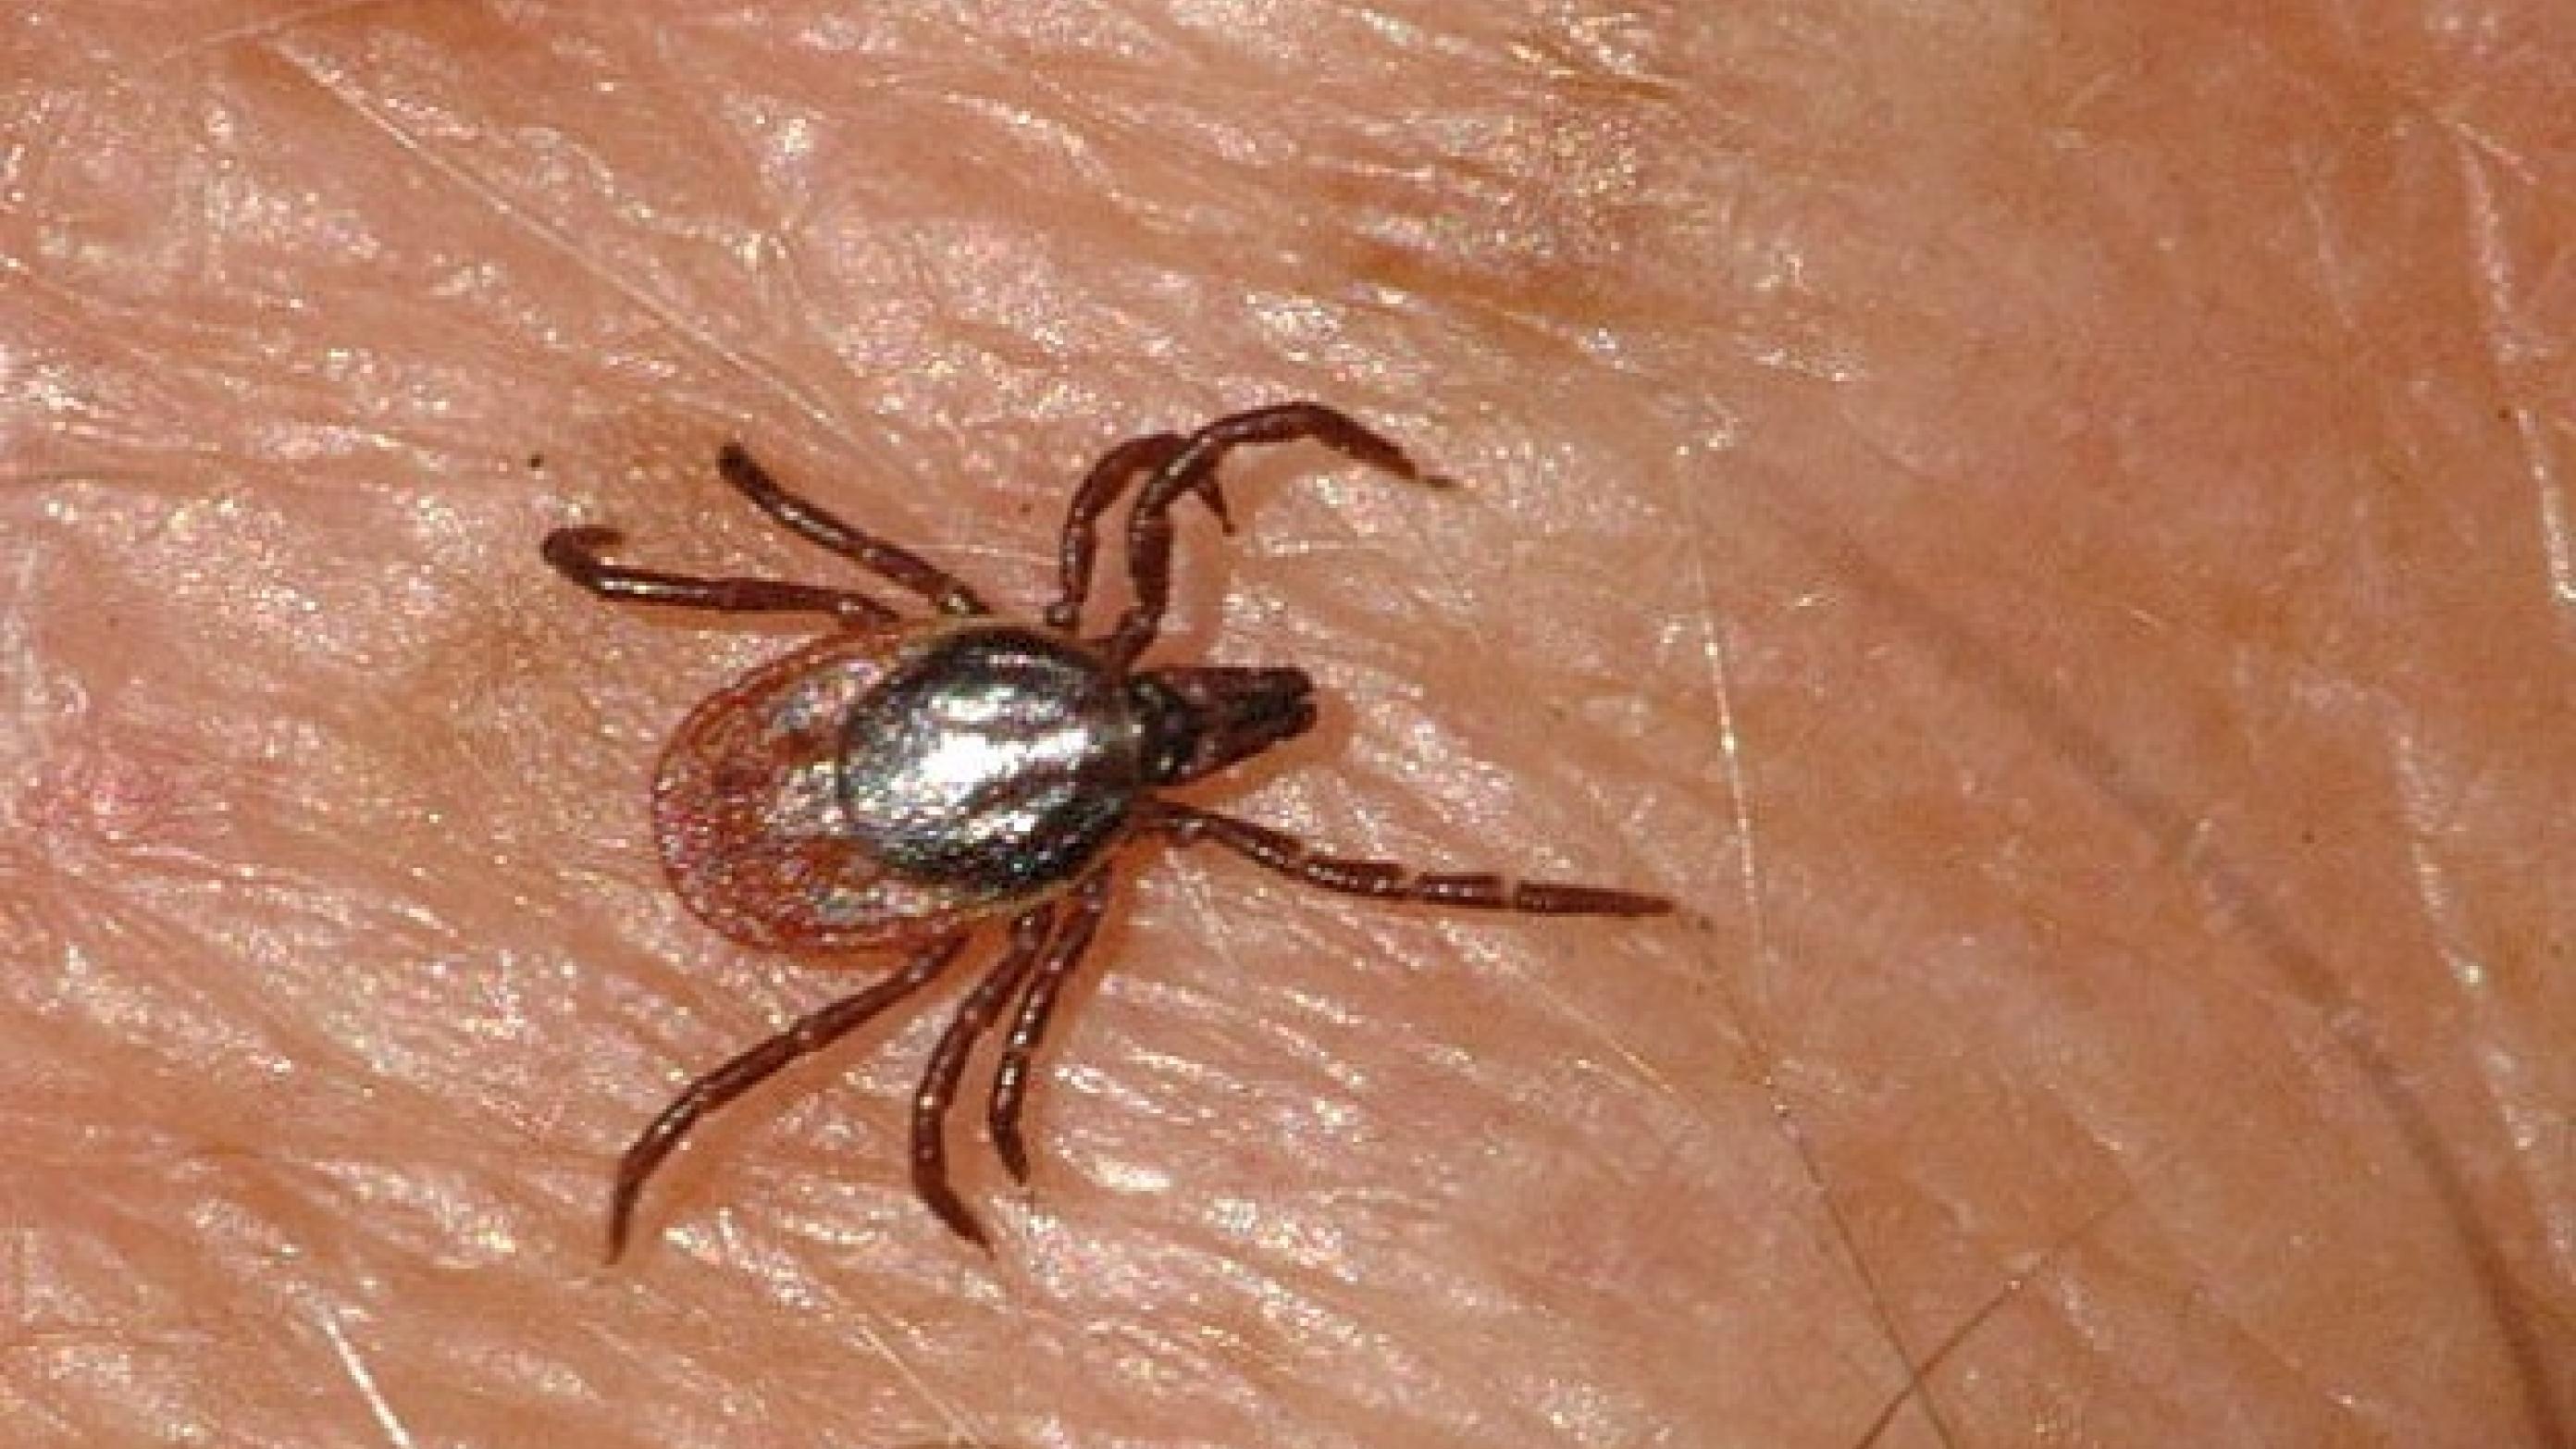 https://commons.wikimedia.org/wiki/File:Ixodes.ricinus.searching.jpg